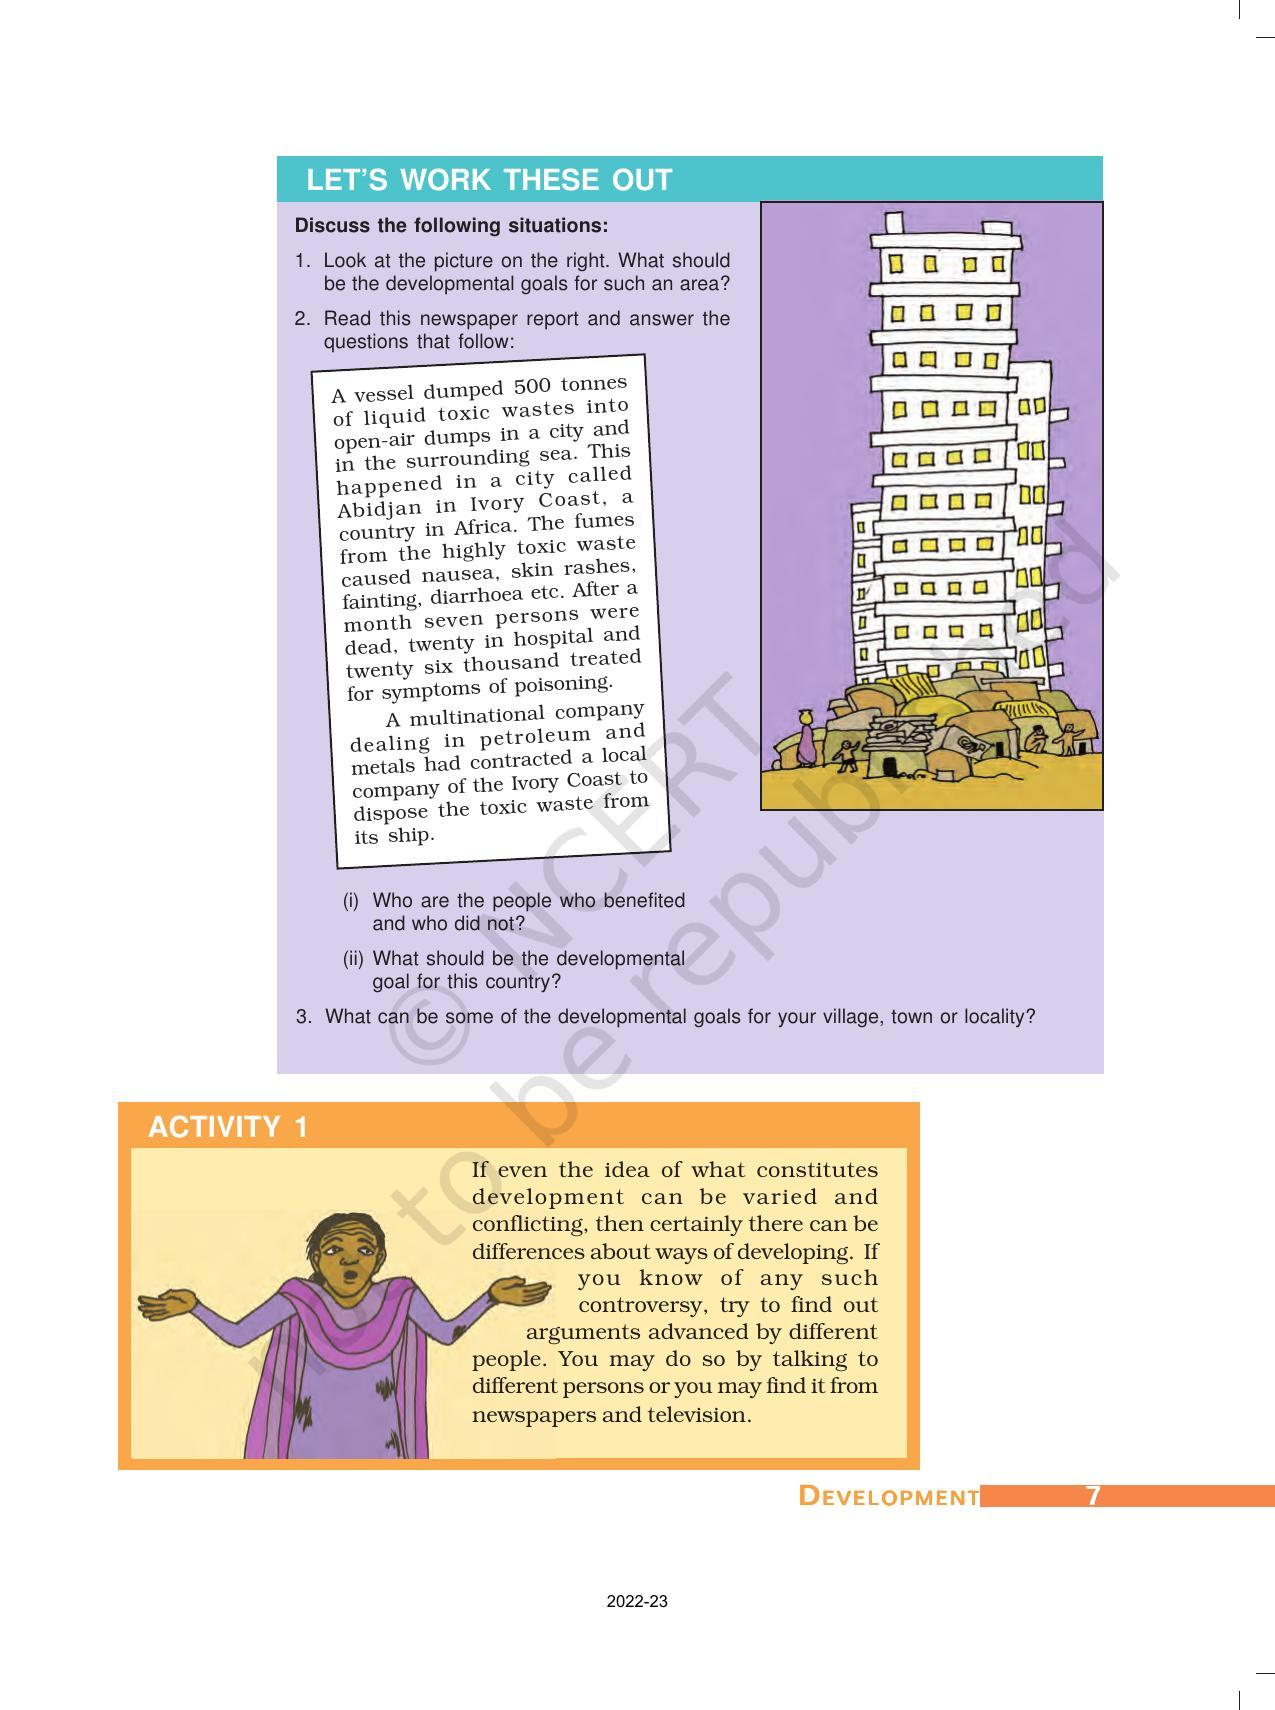 NCERT Book for Class 10 Economics Chapter 1 Development - Page 6